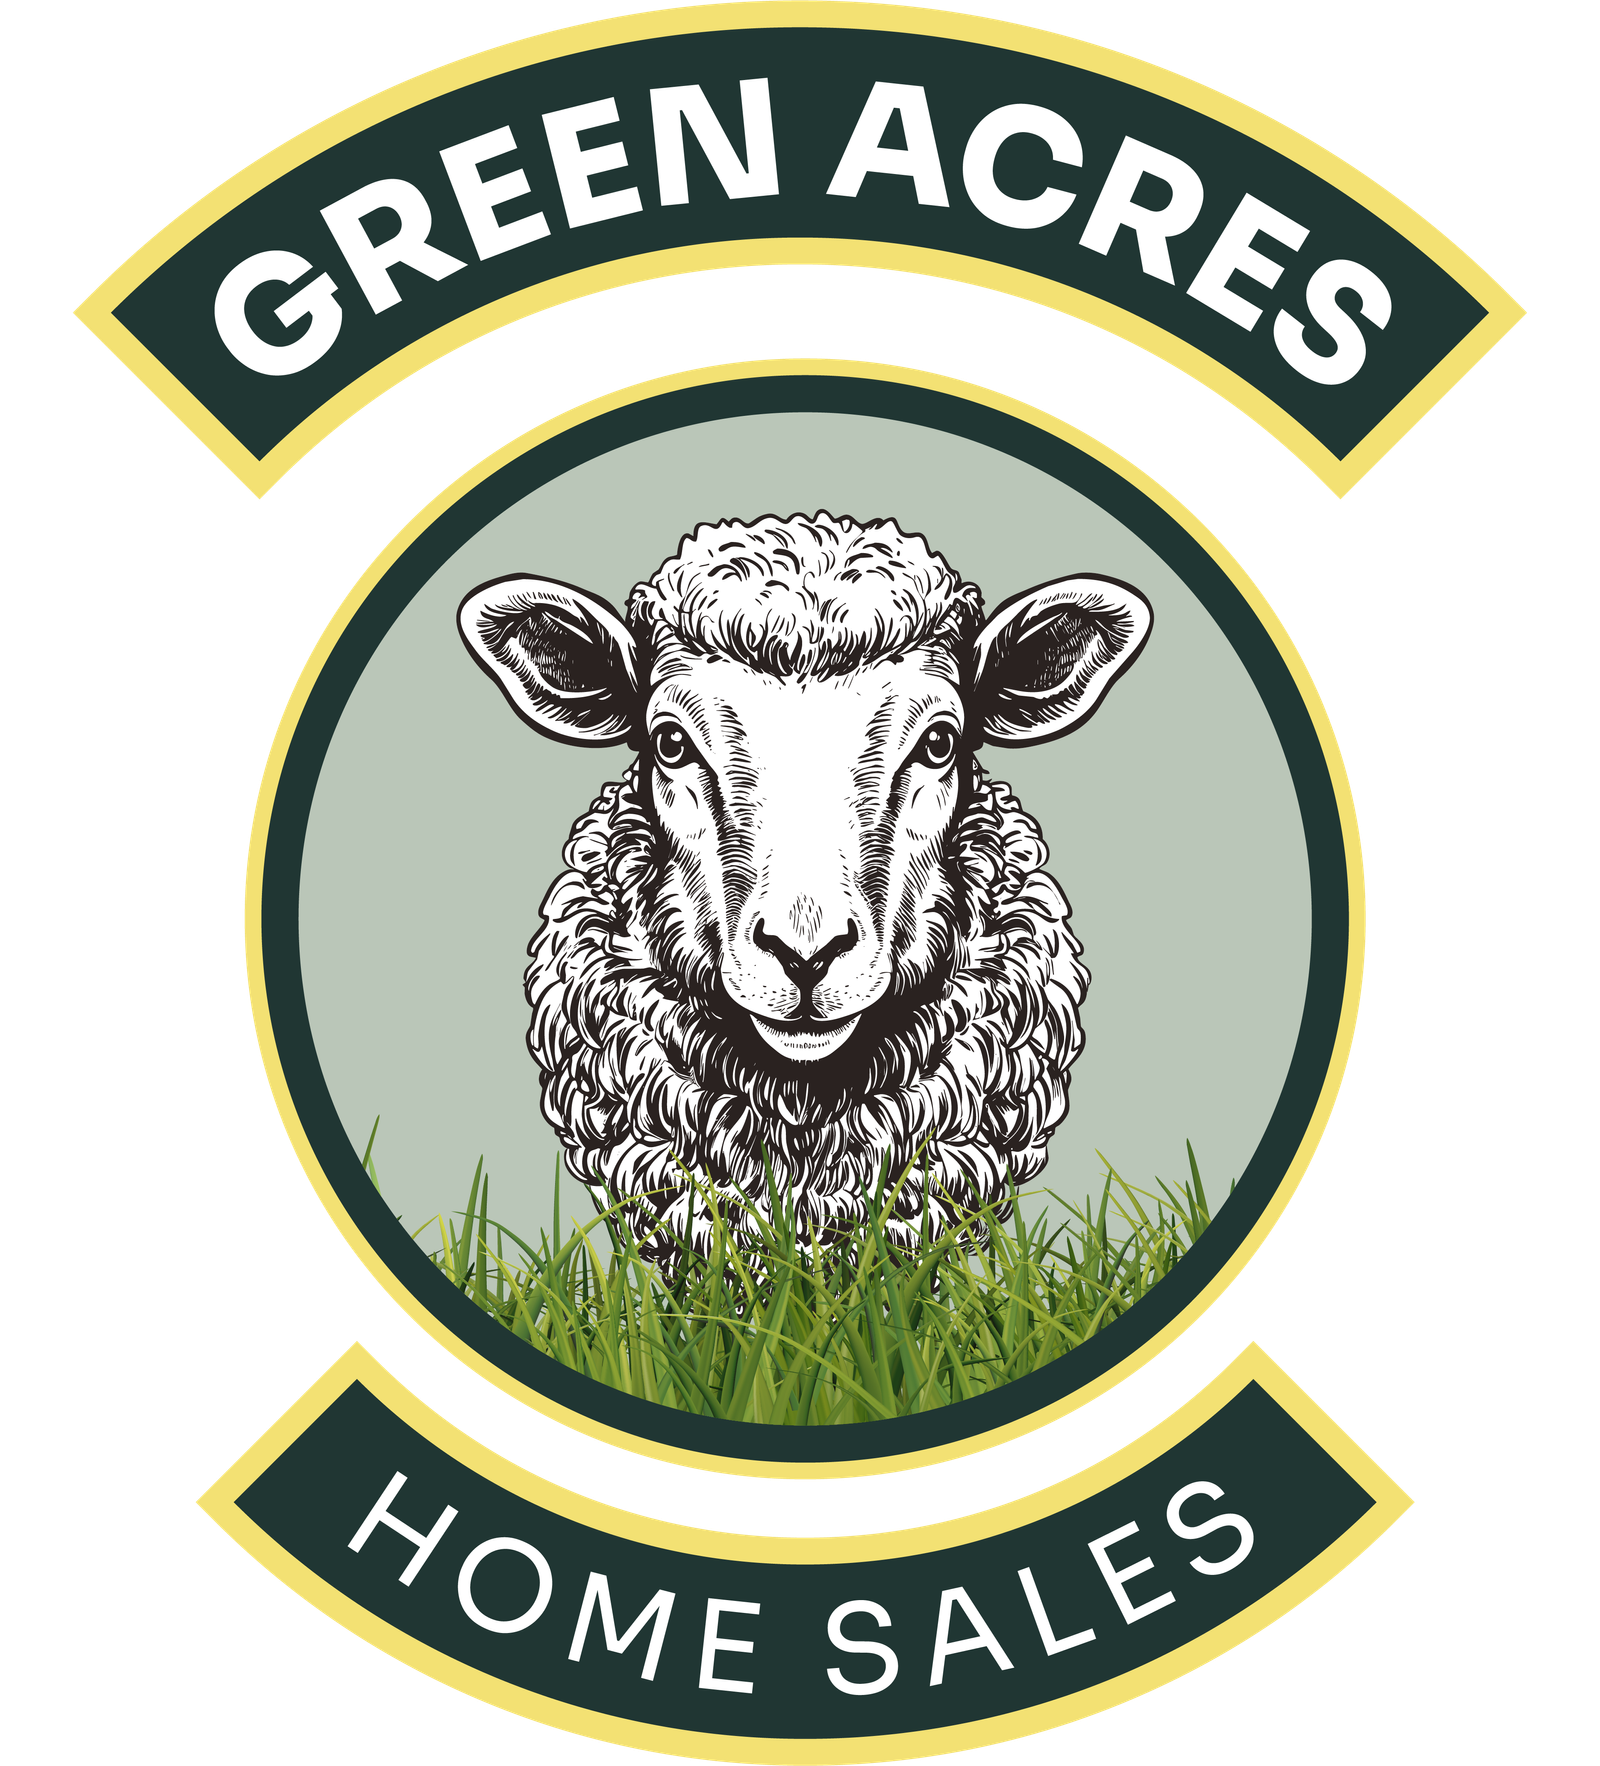 Green Acres Home Sales